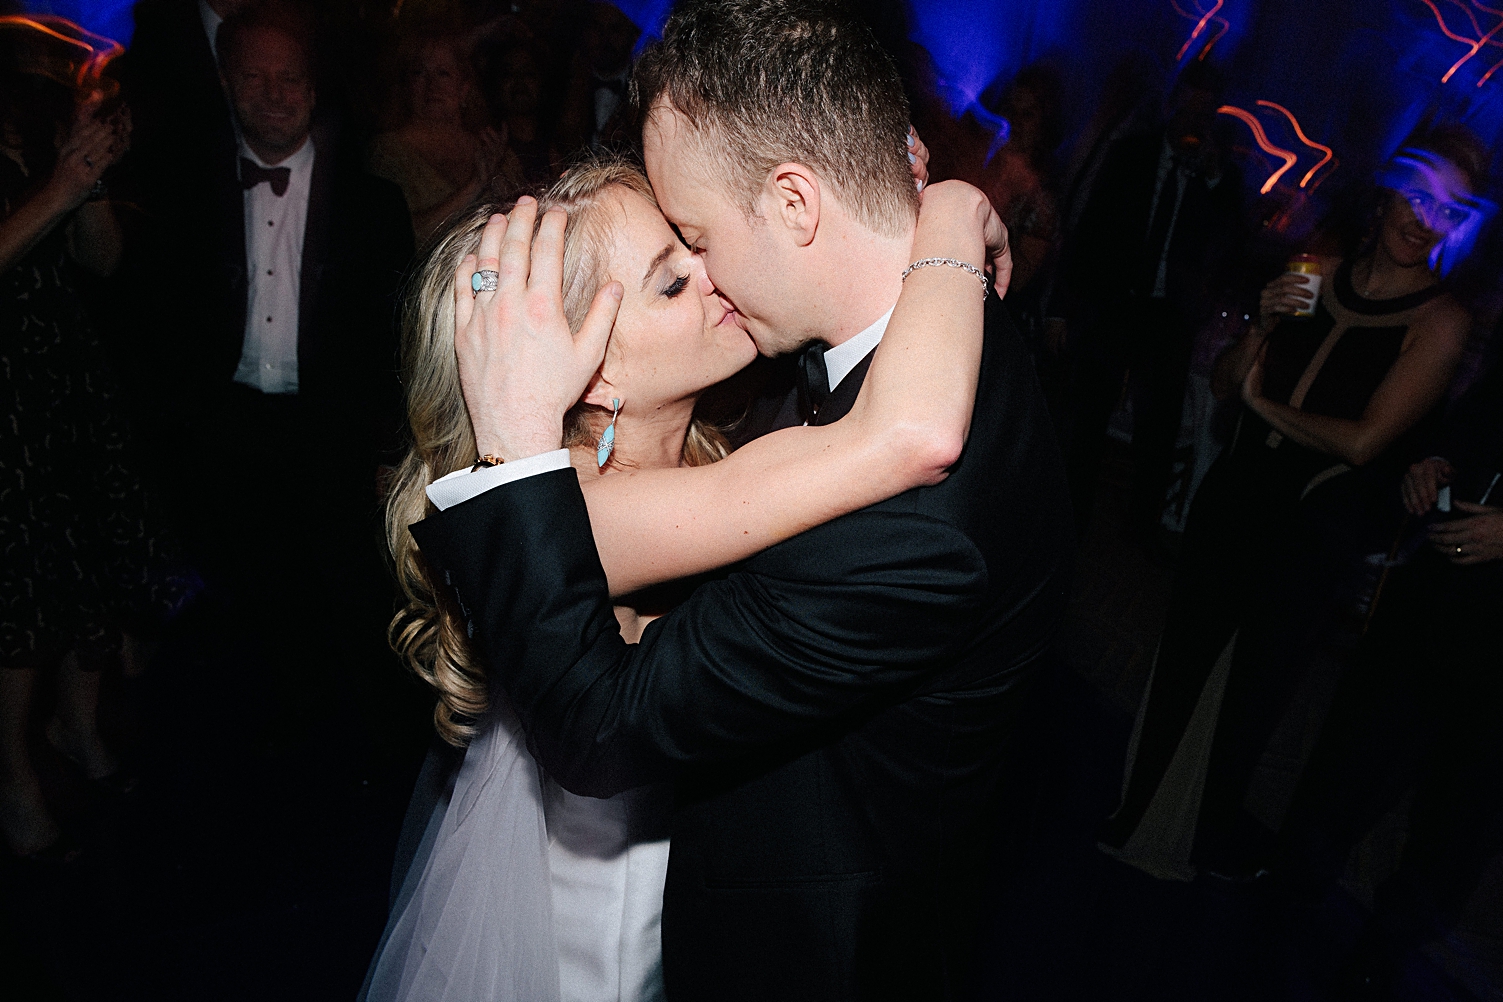 bride and groom kissing at wedding reception party